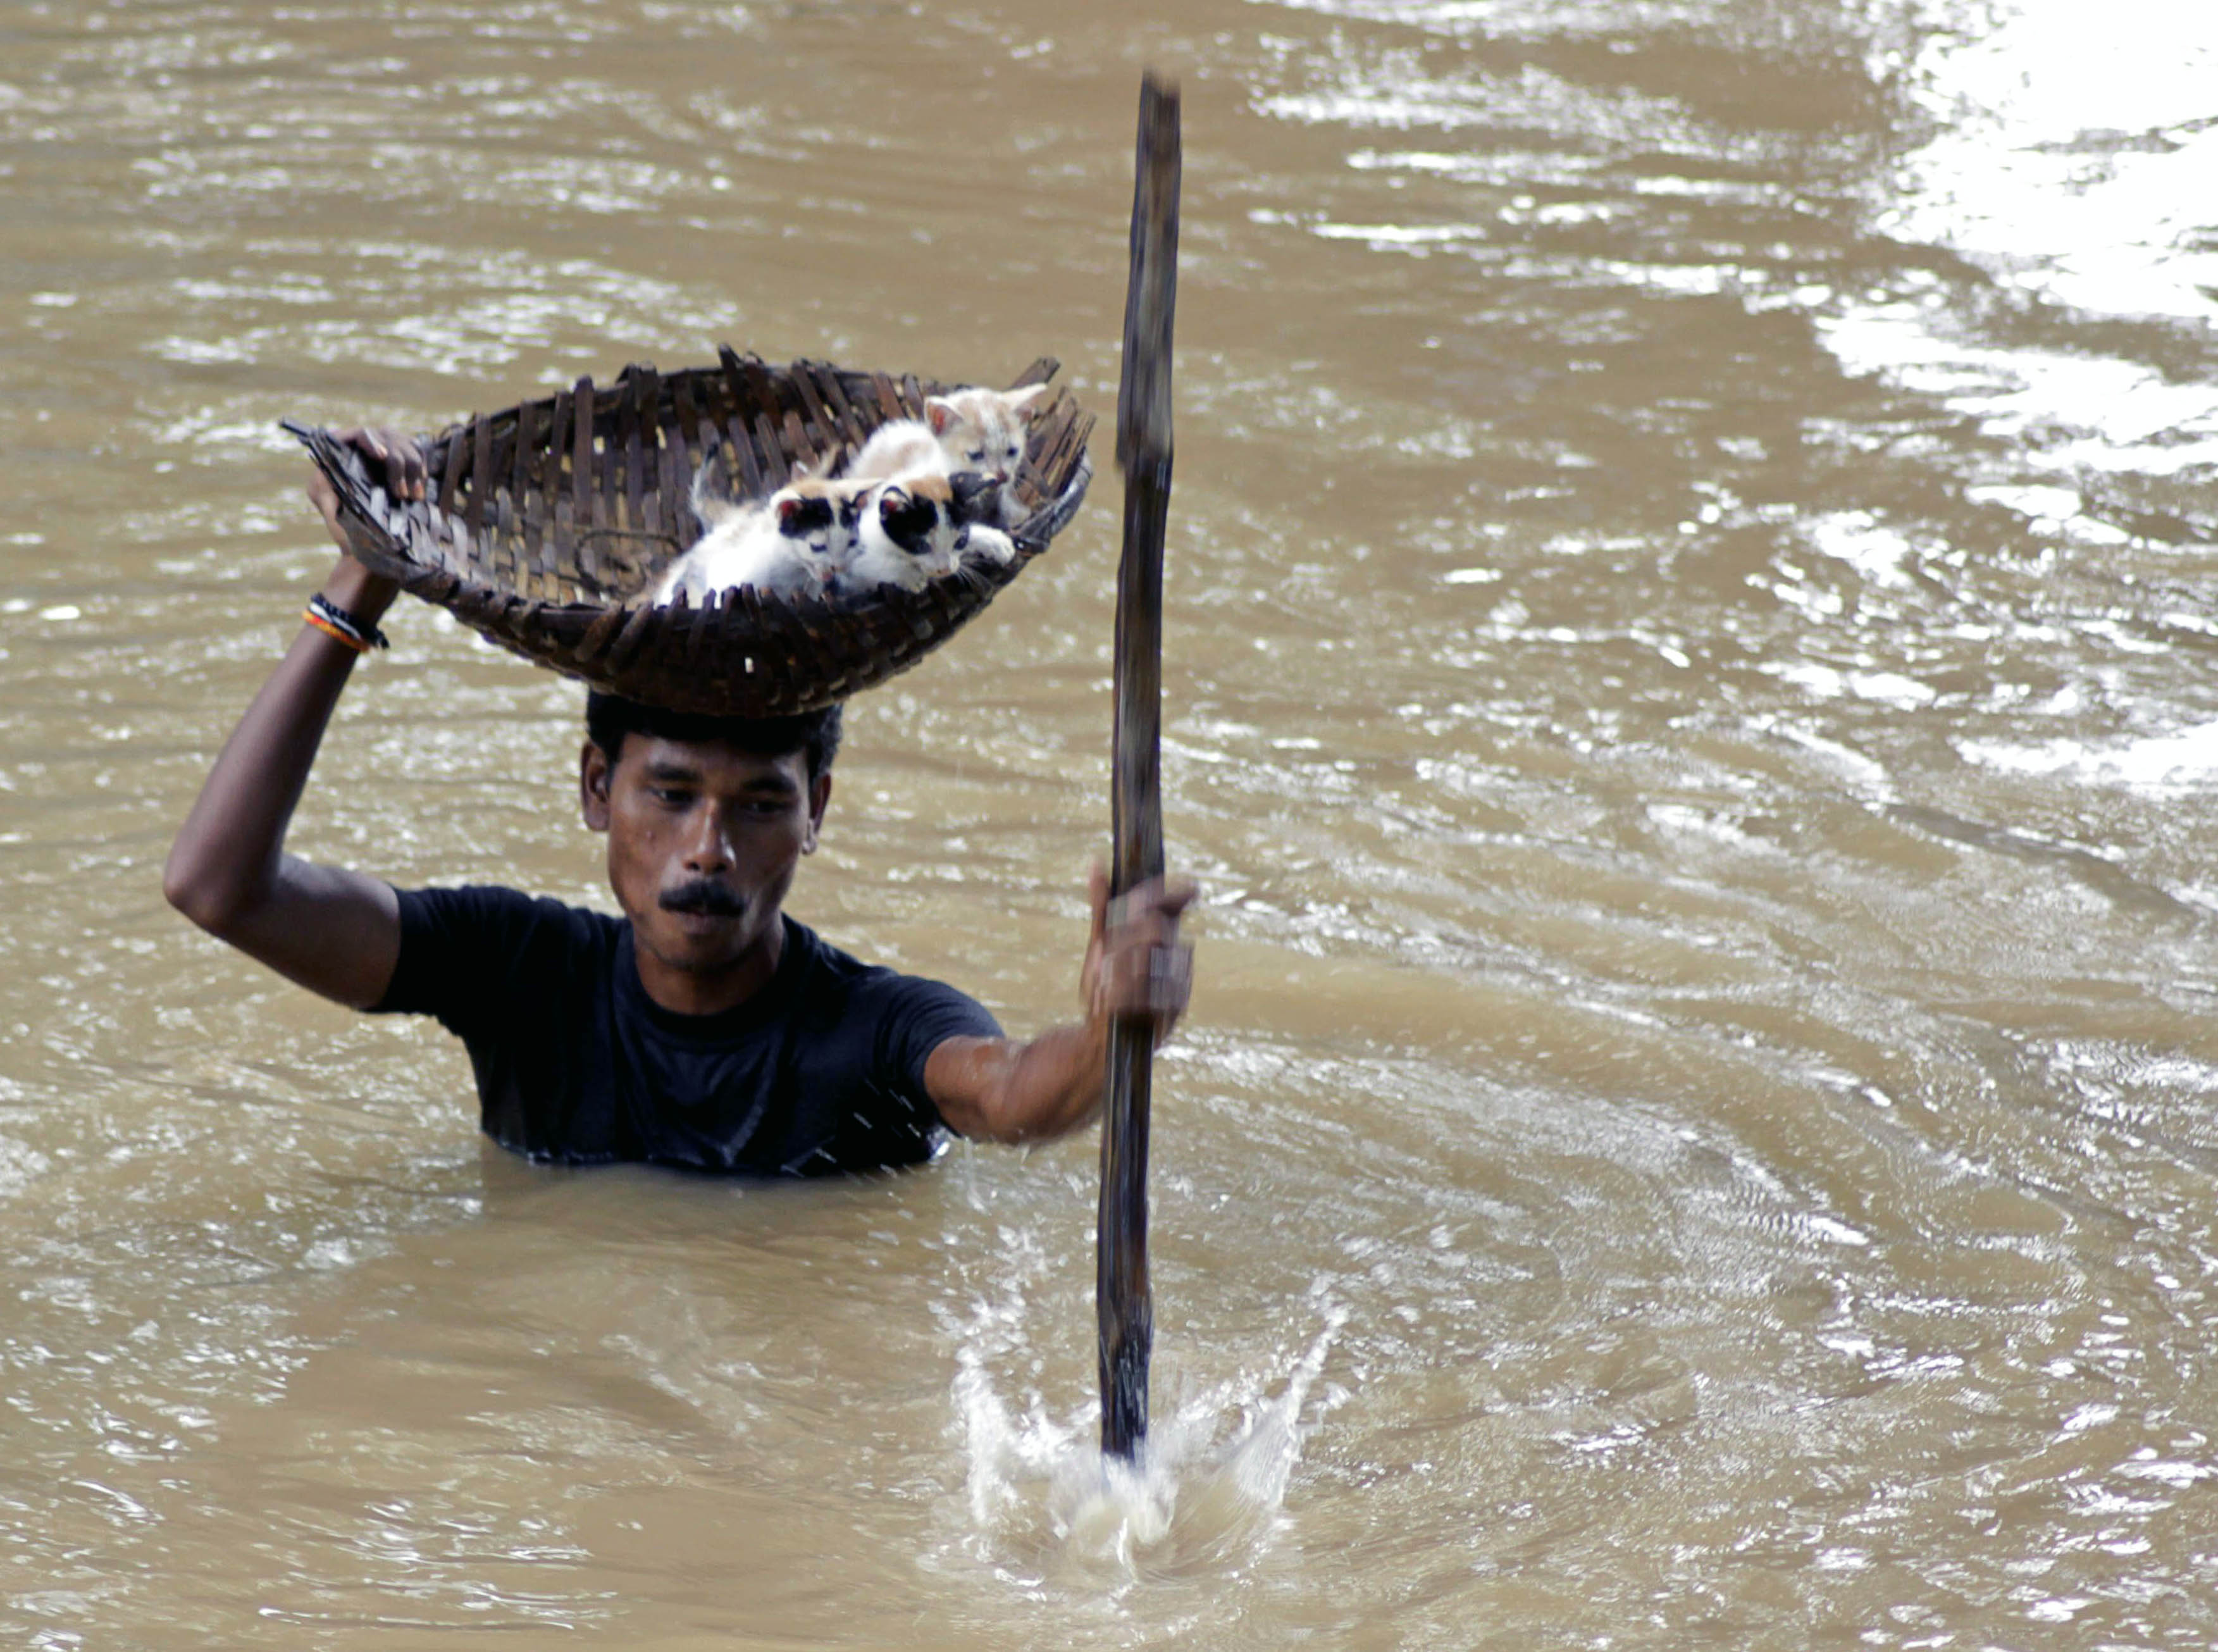 During massive floods taking place in Cuttack City, India, in 2011, a heroic villager saved numerous stray cats by carrying them with a basket balanced on his head.